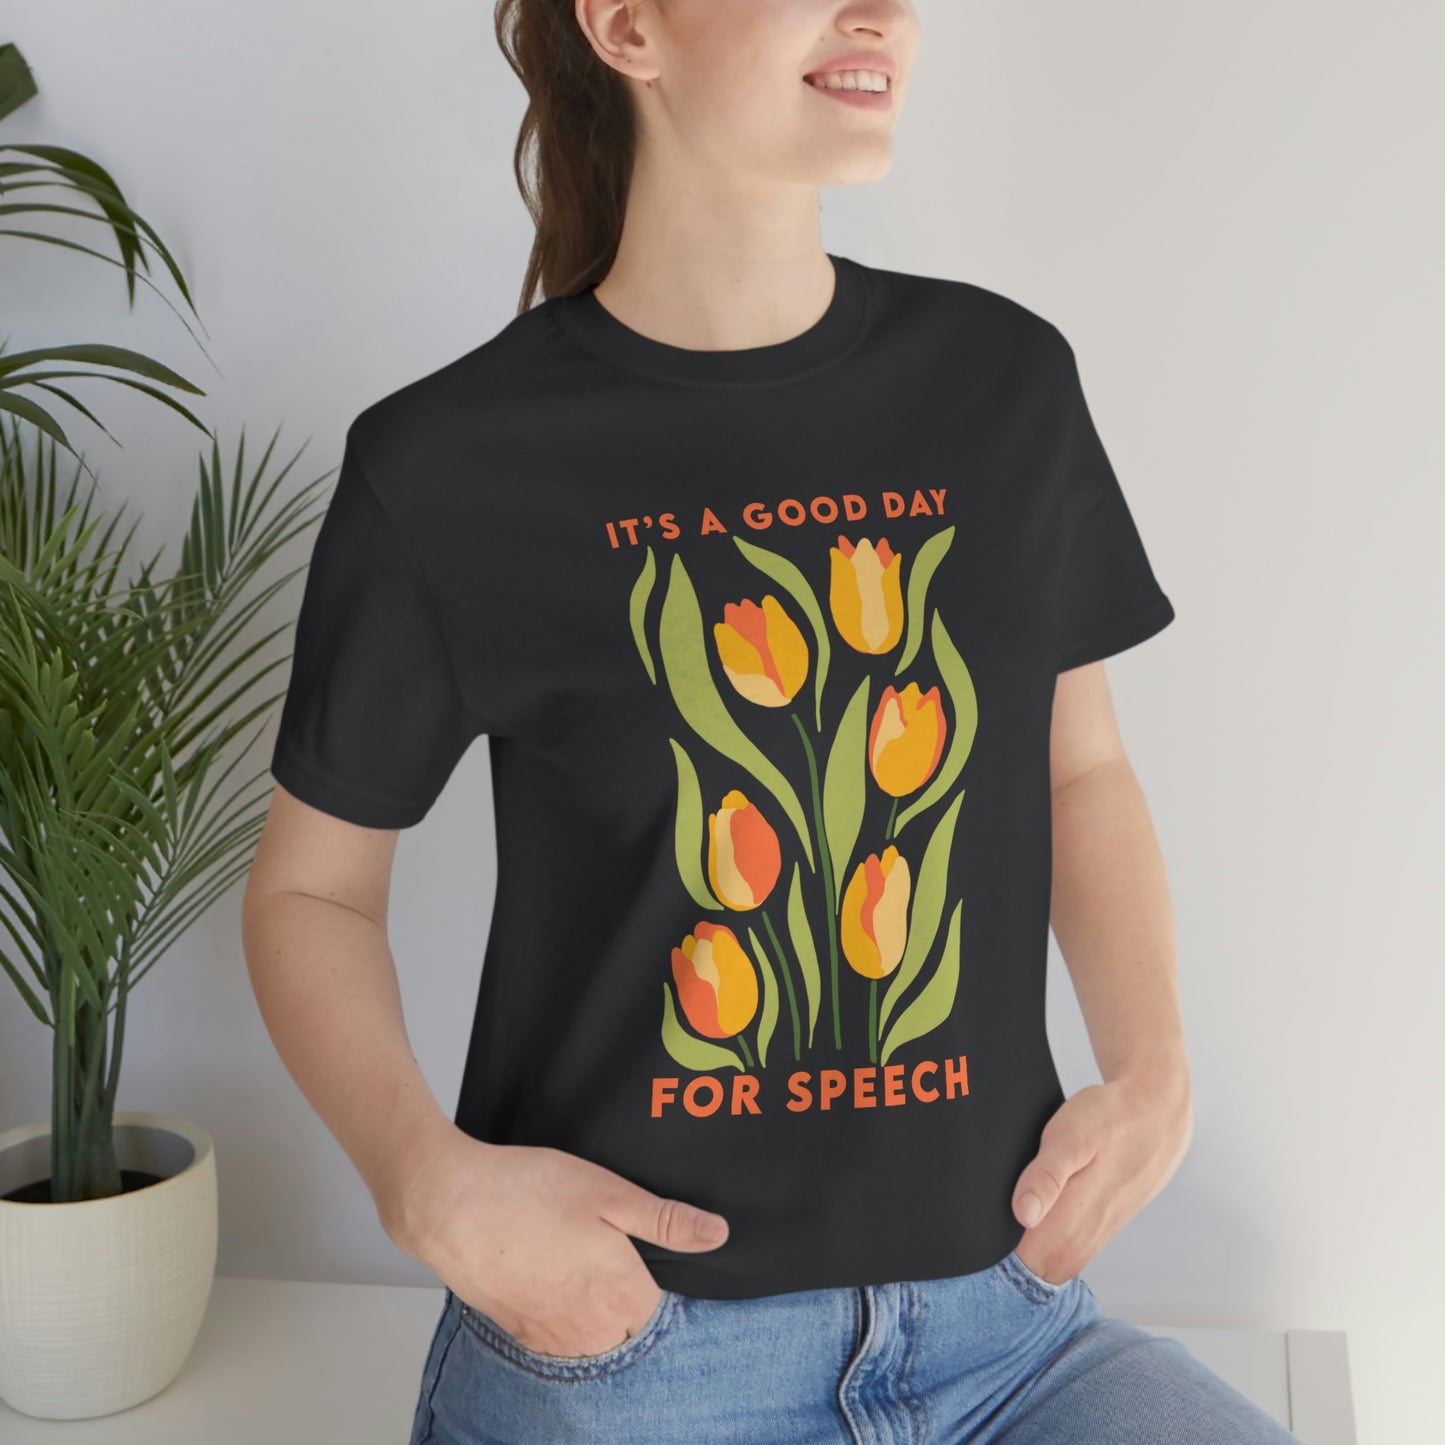 It's A Good Day for Speech Tee